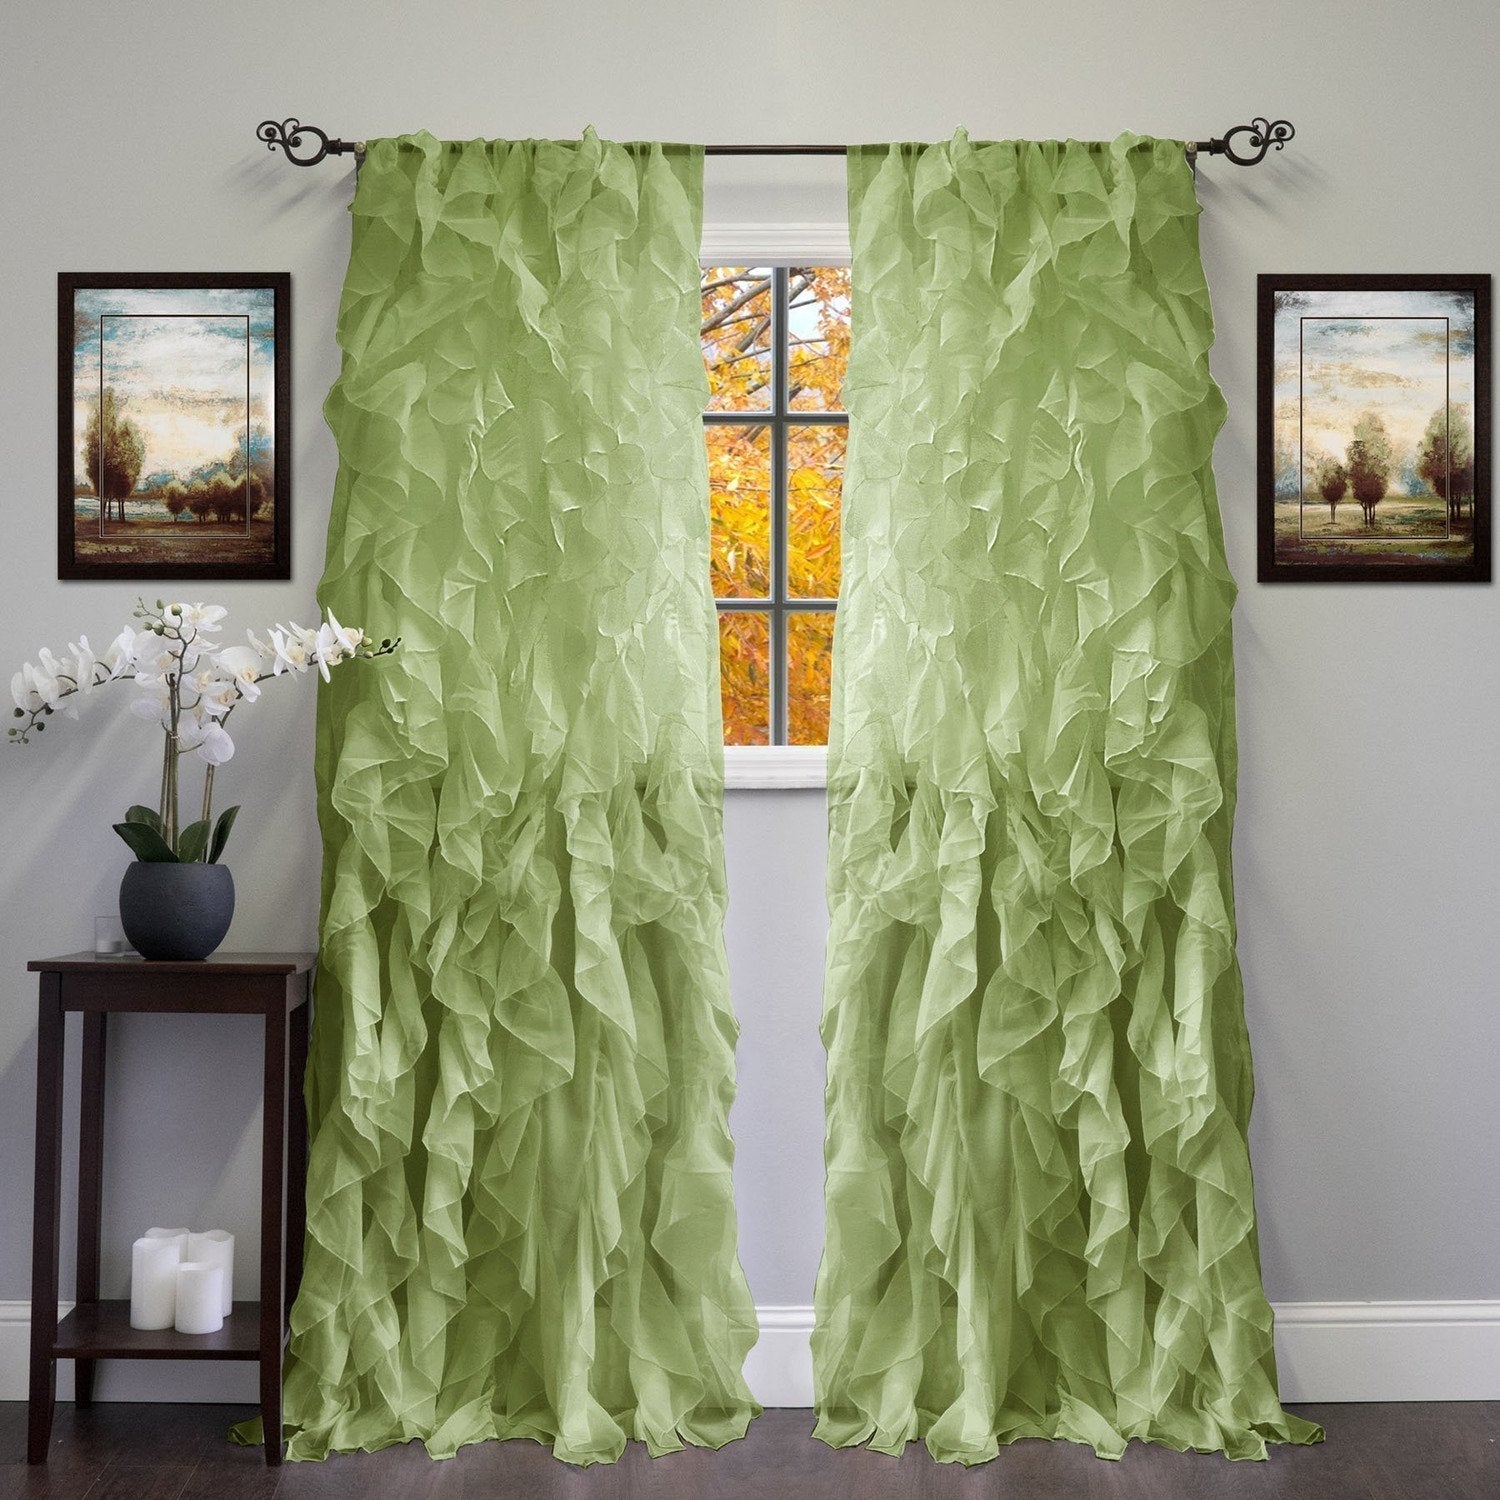 Chic Sheer Voile Ruffled Window Curtain 2-Pack Sage 84X100